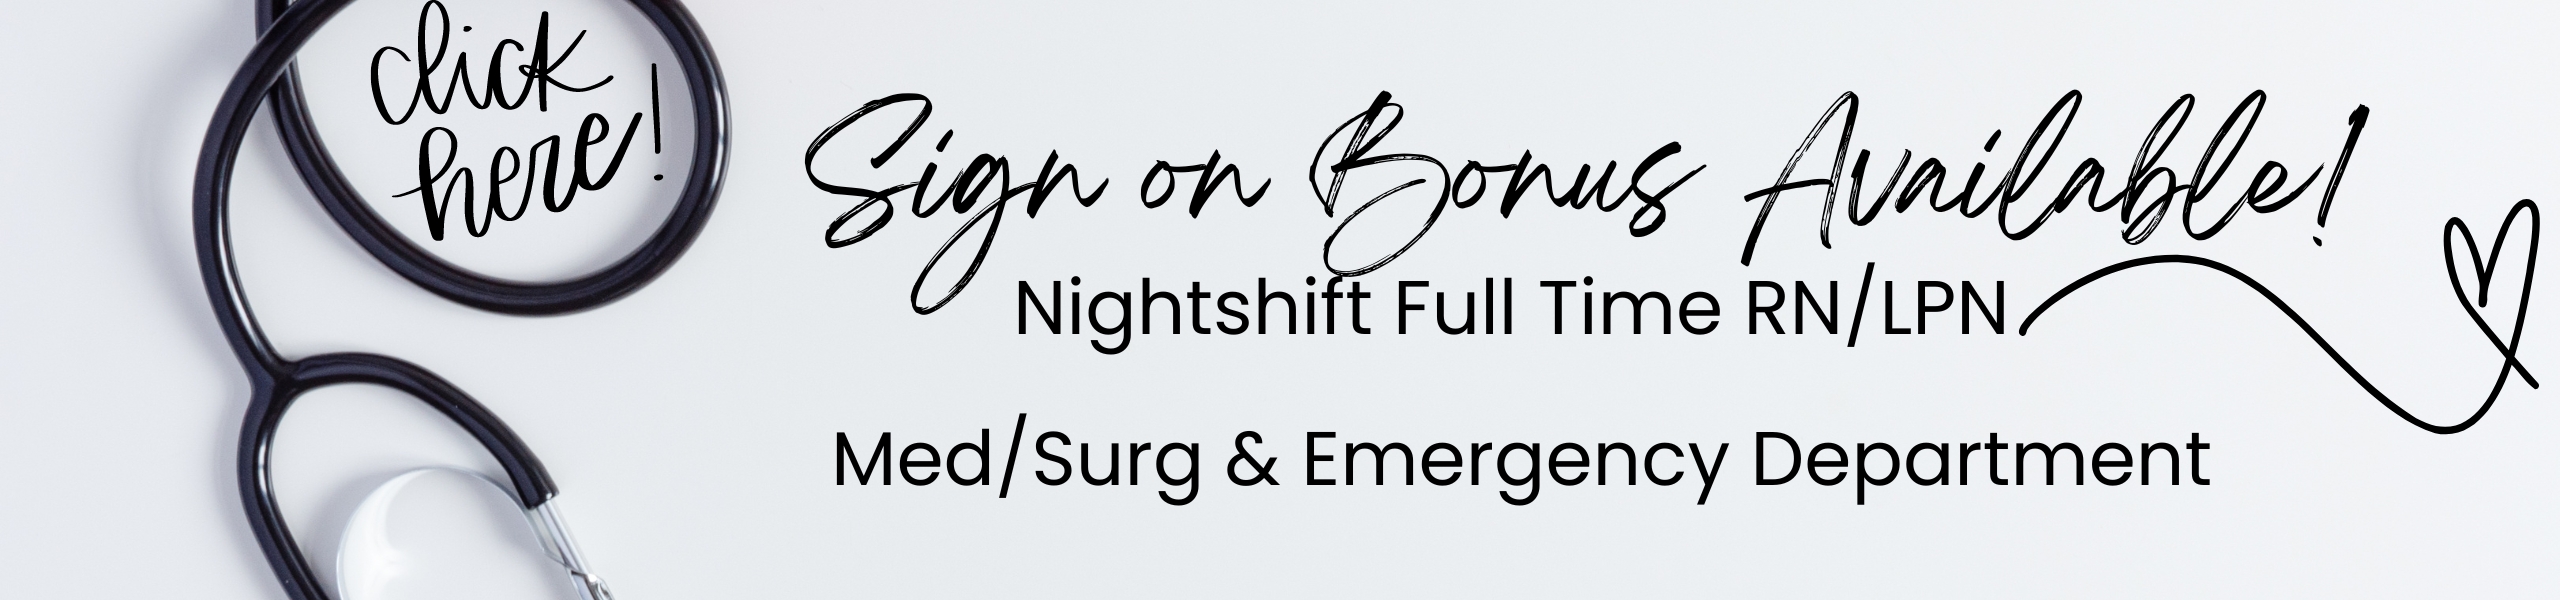 Sign on Bonus Available!

Nightshift Full Time RN/LPN
Med/Surg and Emergency Department & Quality Assurance/ Process Improvement Nurse